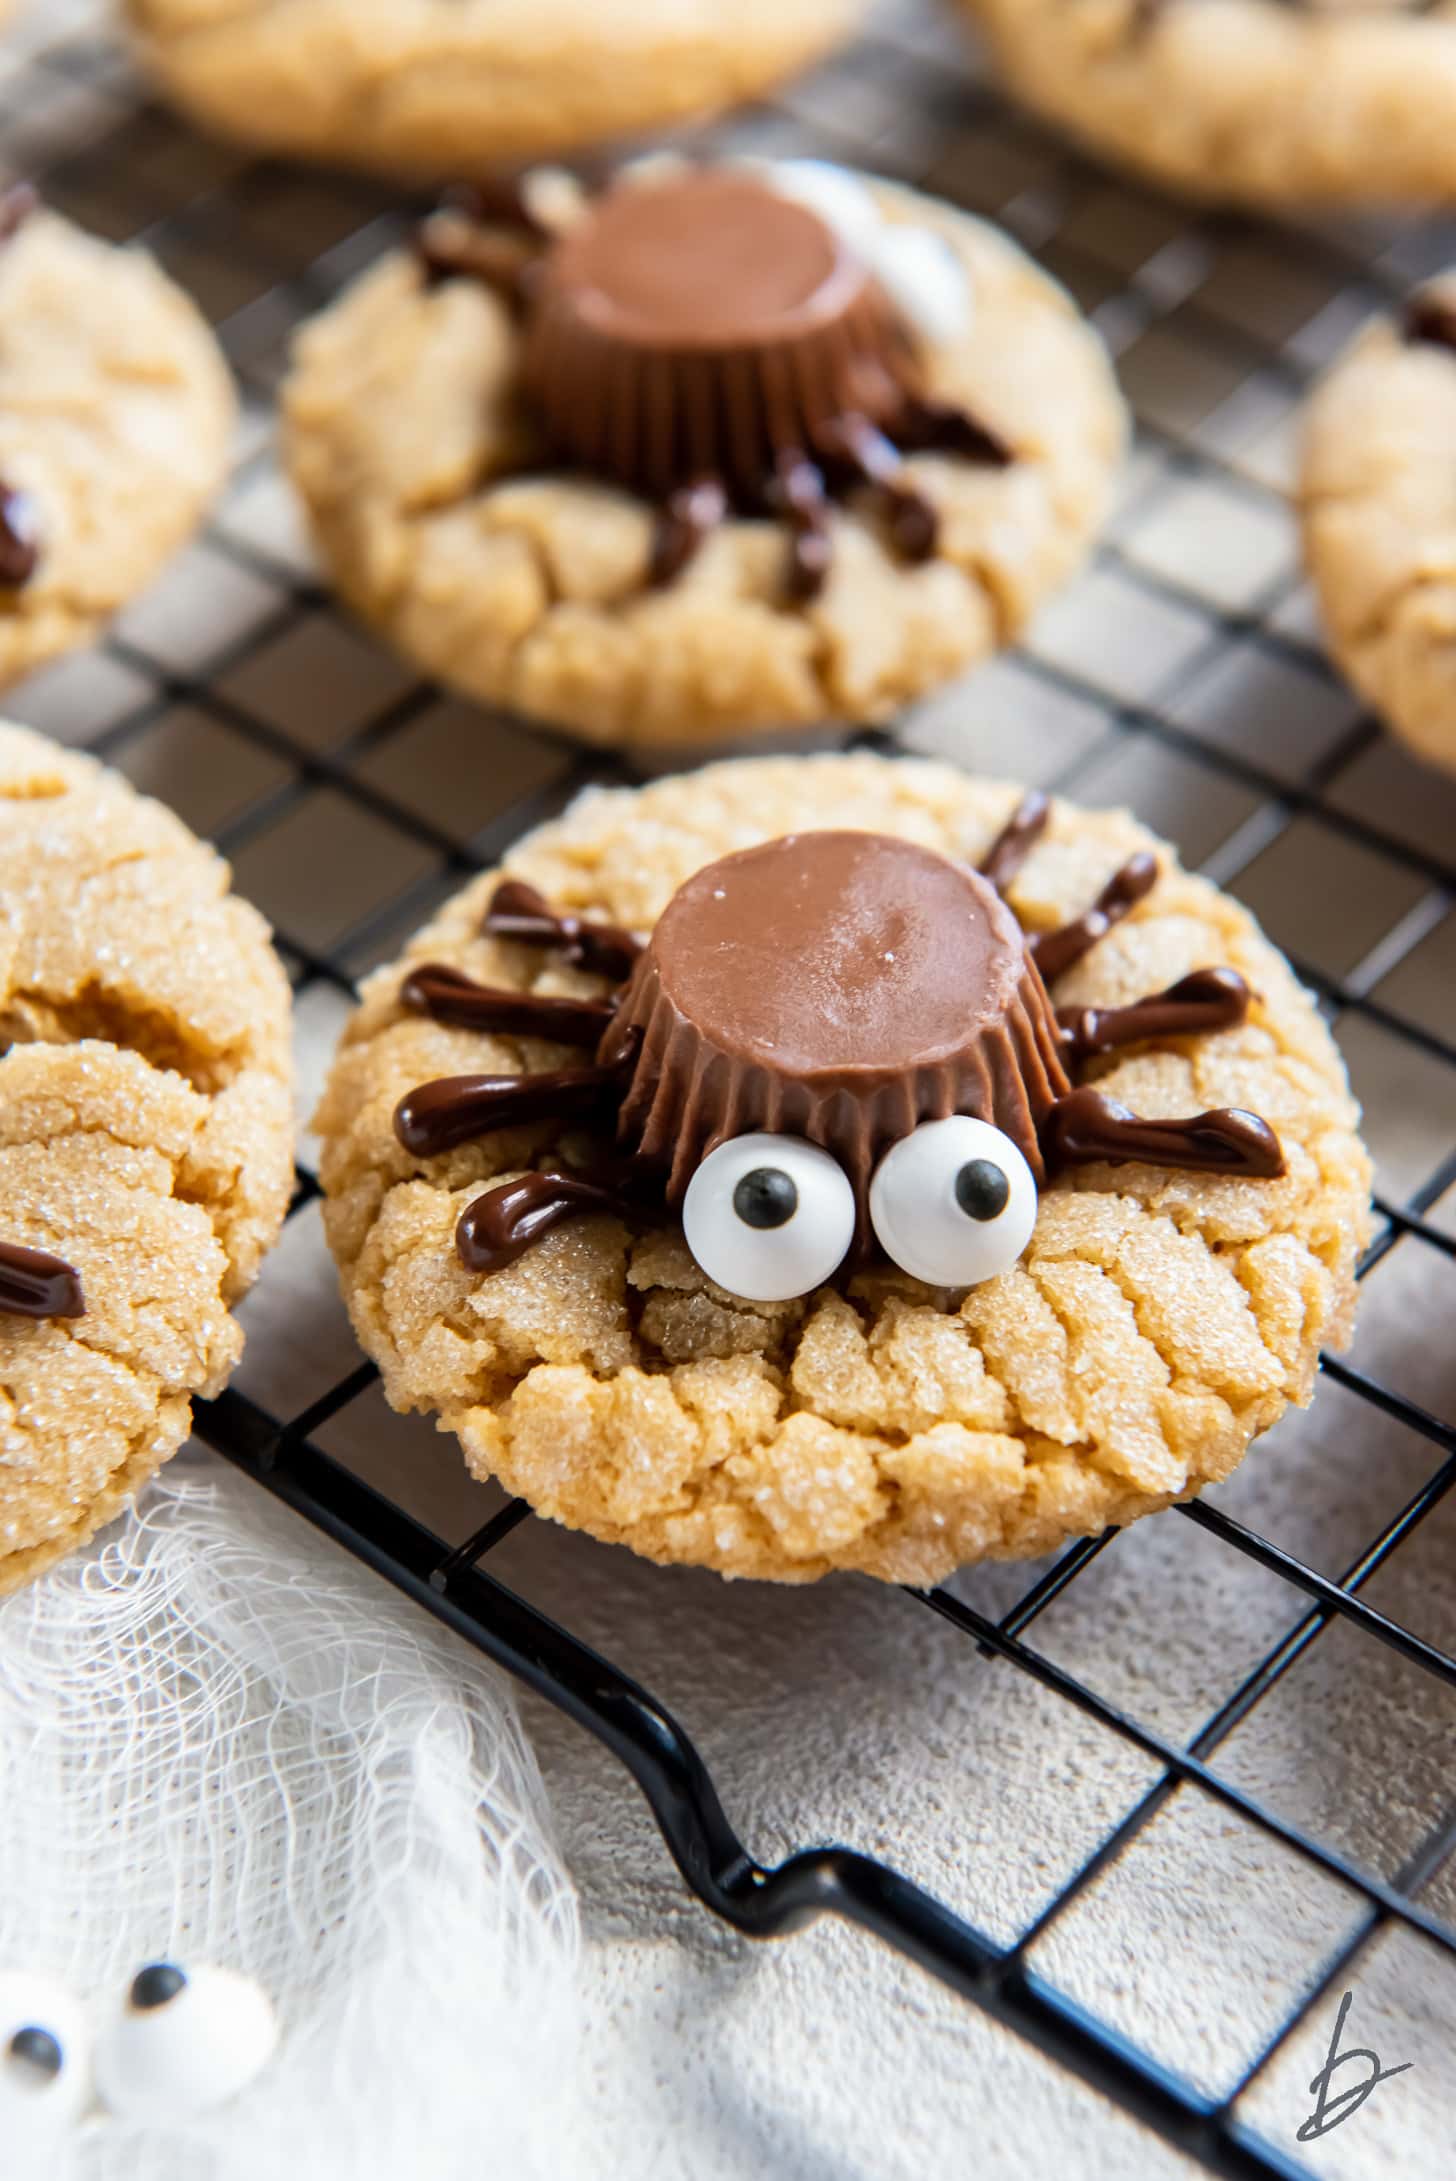 peanut butter spider cookie with melted chocolate legs, candy eyes and peanut butter cup body.